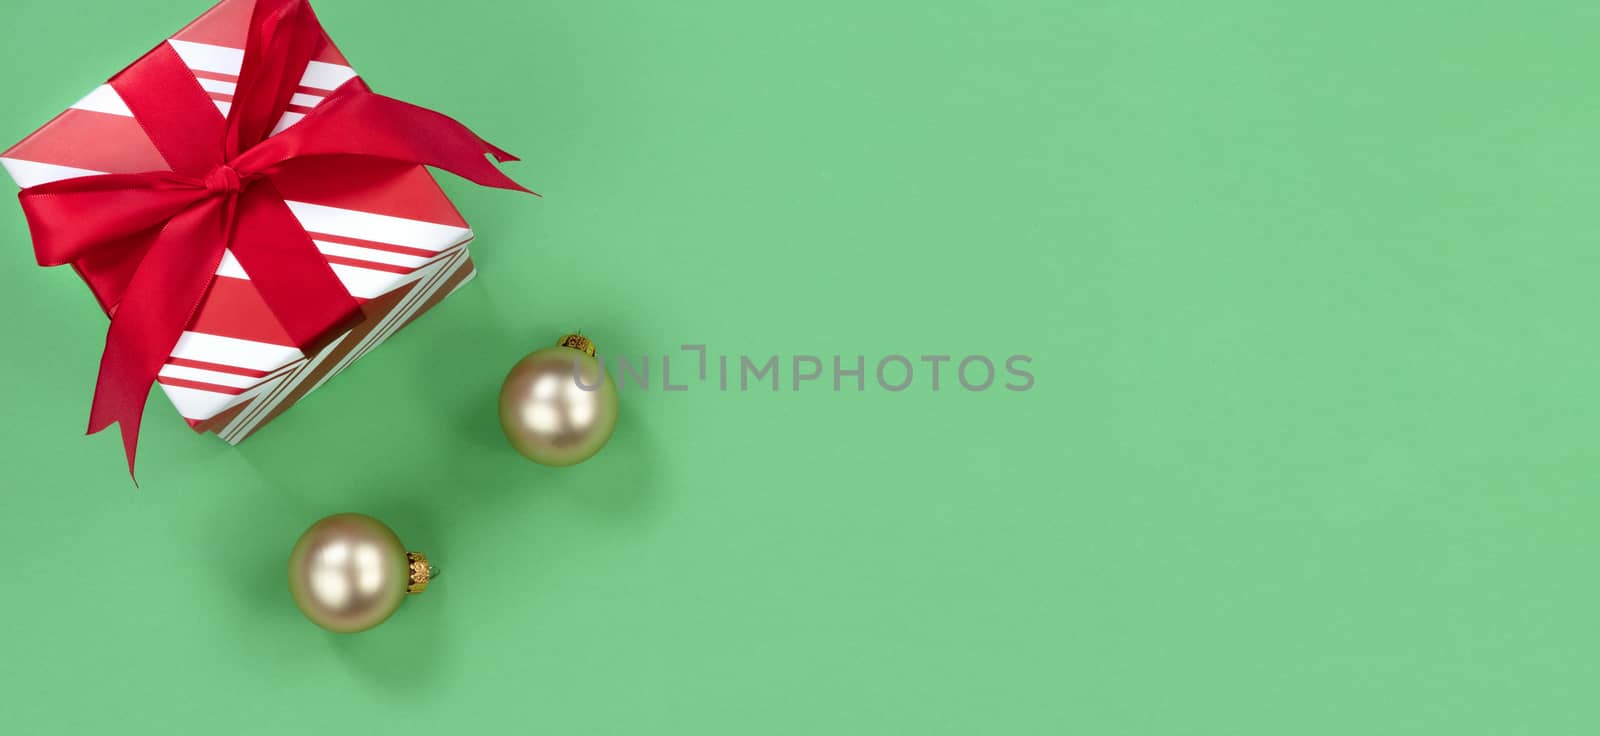 Green background with gift box and golden ornaments for the Christmas season 